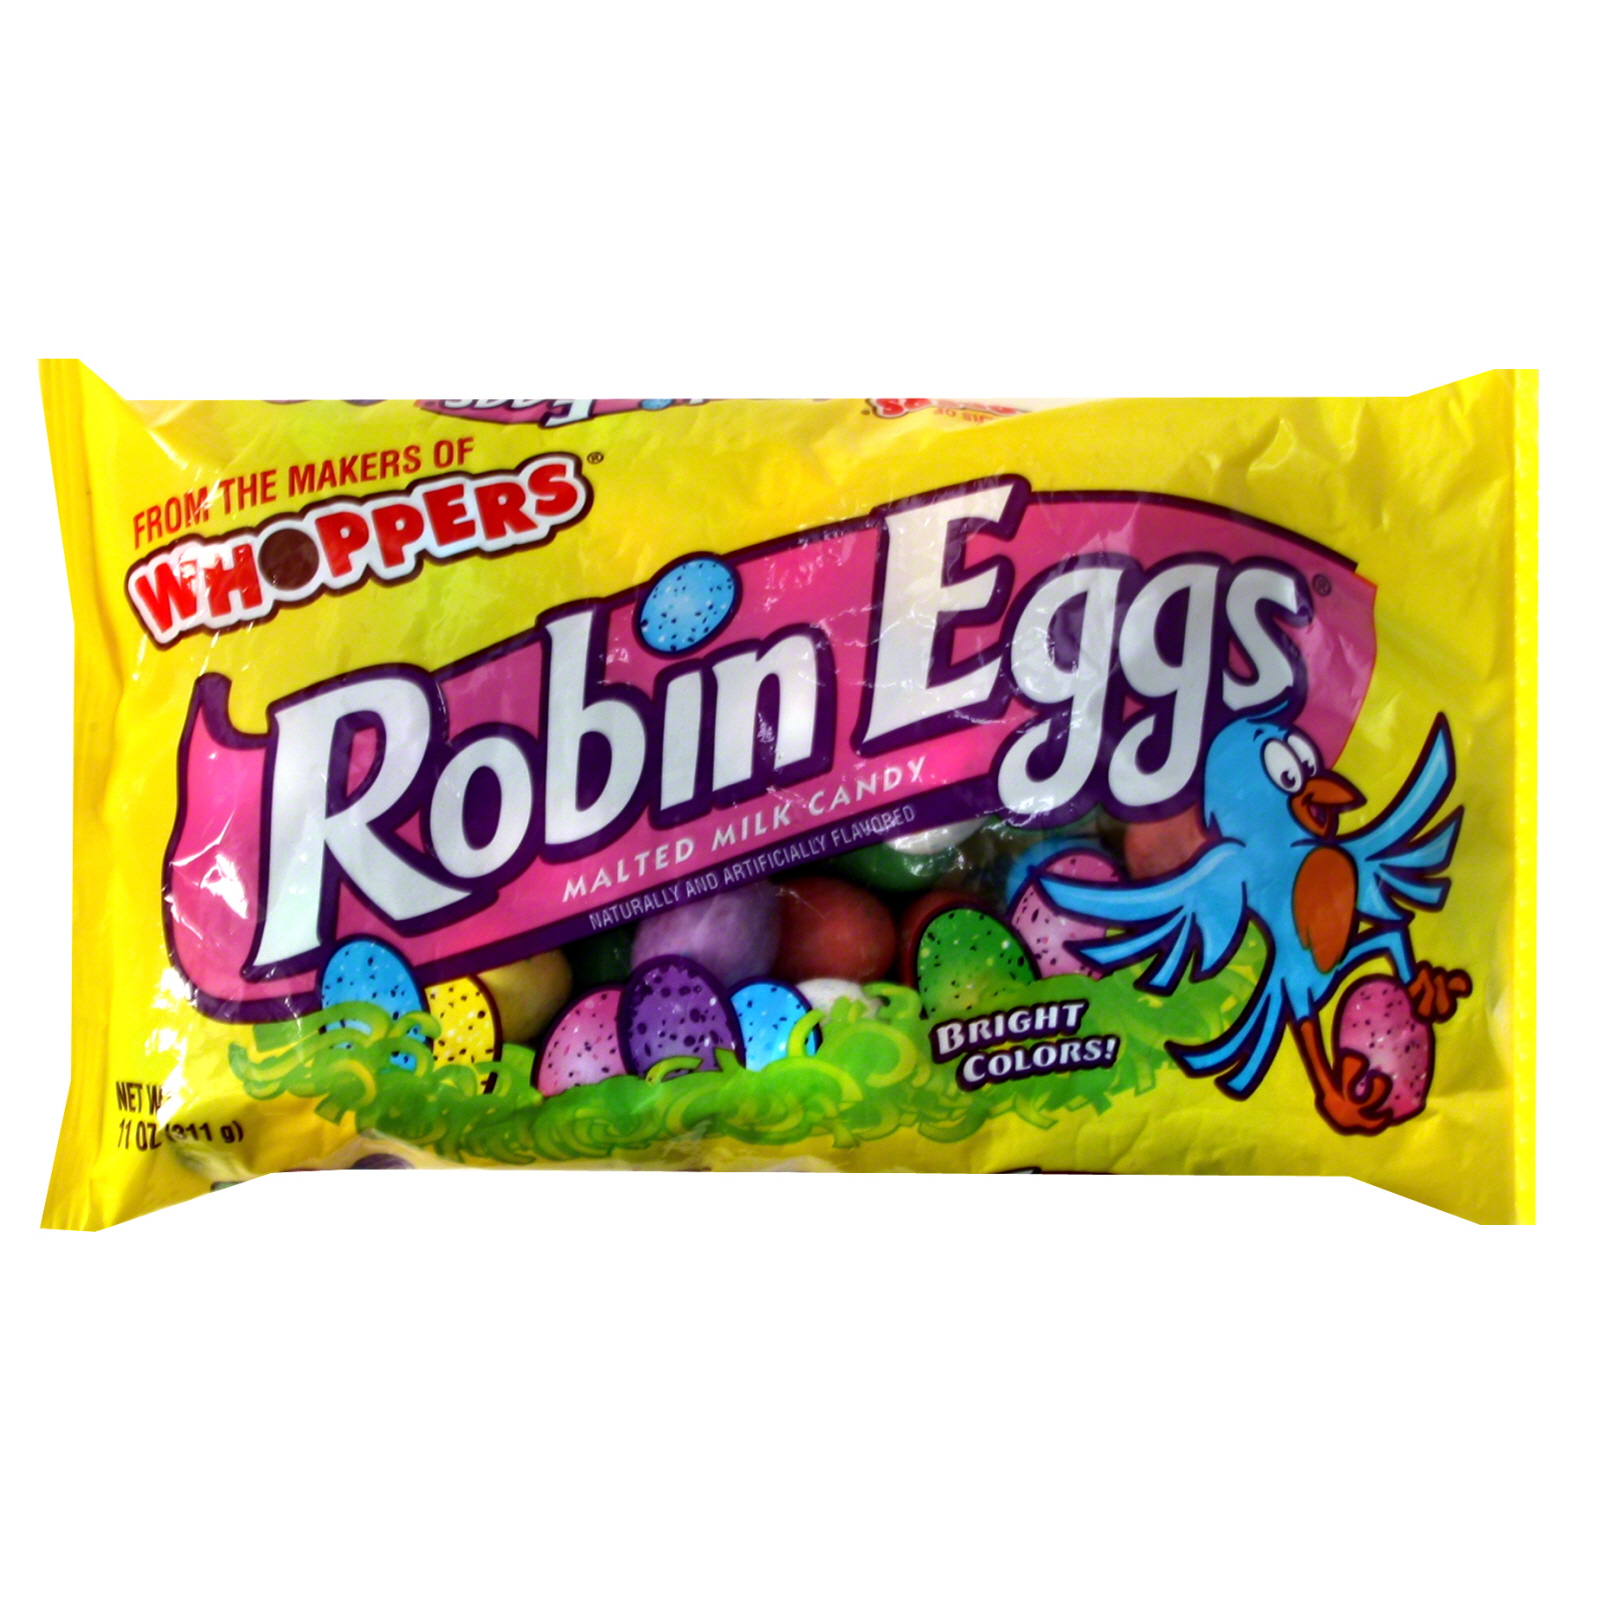 Whoppers Malted Milk Candy, Robin Eggs, 11 oz (311 g)